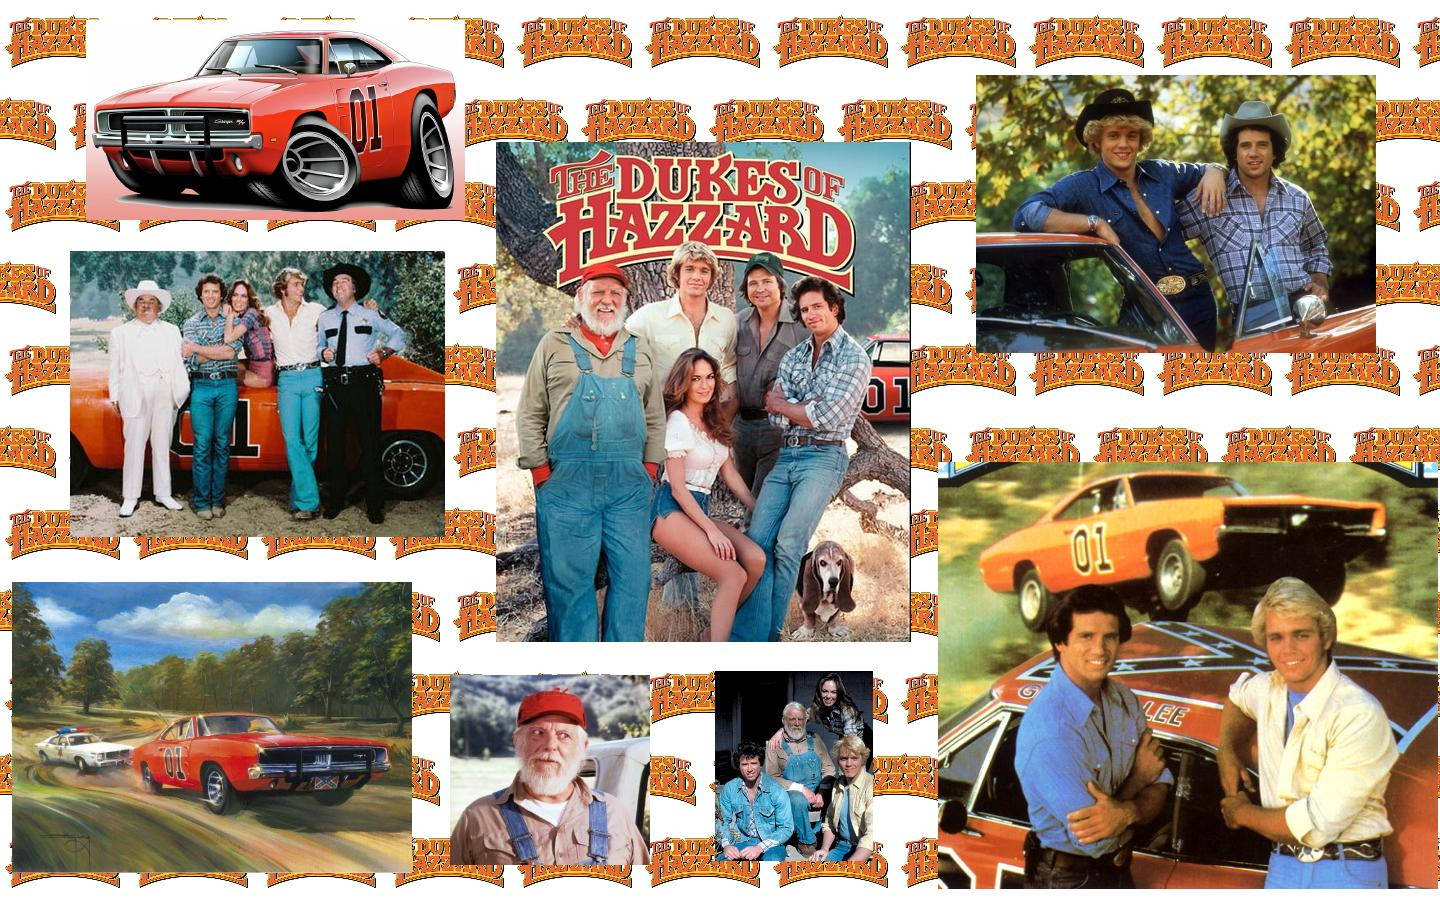 A classic funk car - the General Lee from the iconic show, Dukes of Hazzard Wallpaper